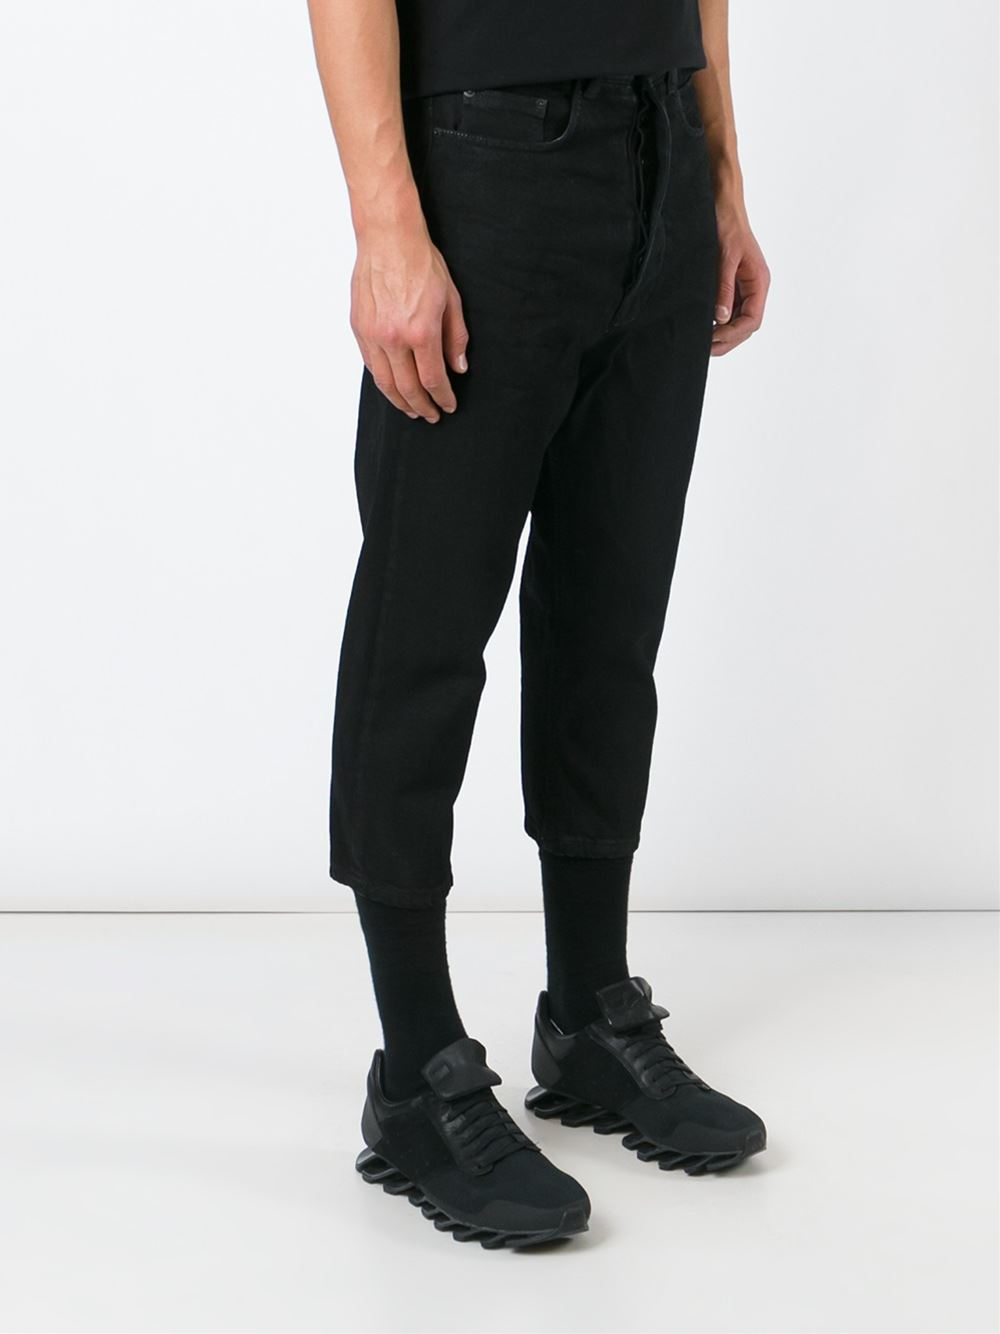 Lyst - DRKSHDW by Rick Owens Cropped Jeans in Black for Men